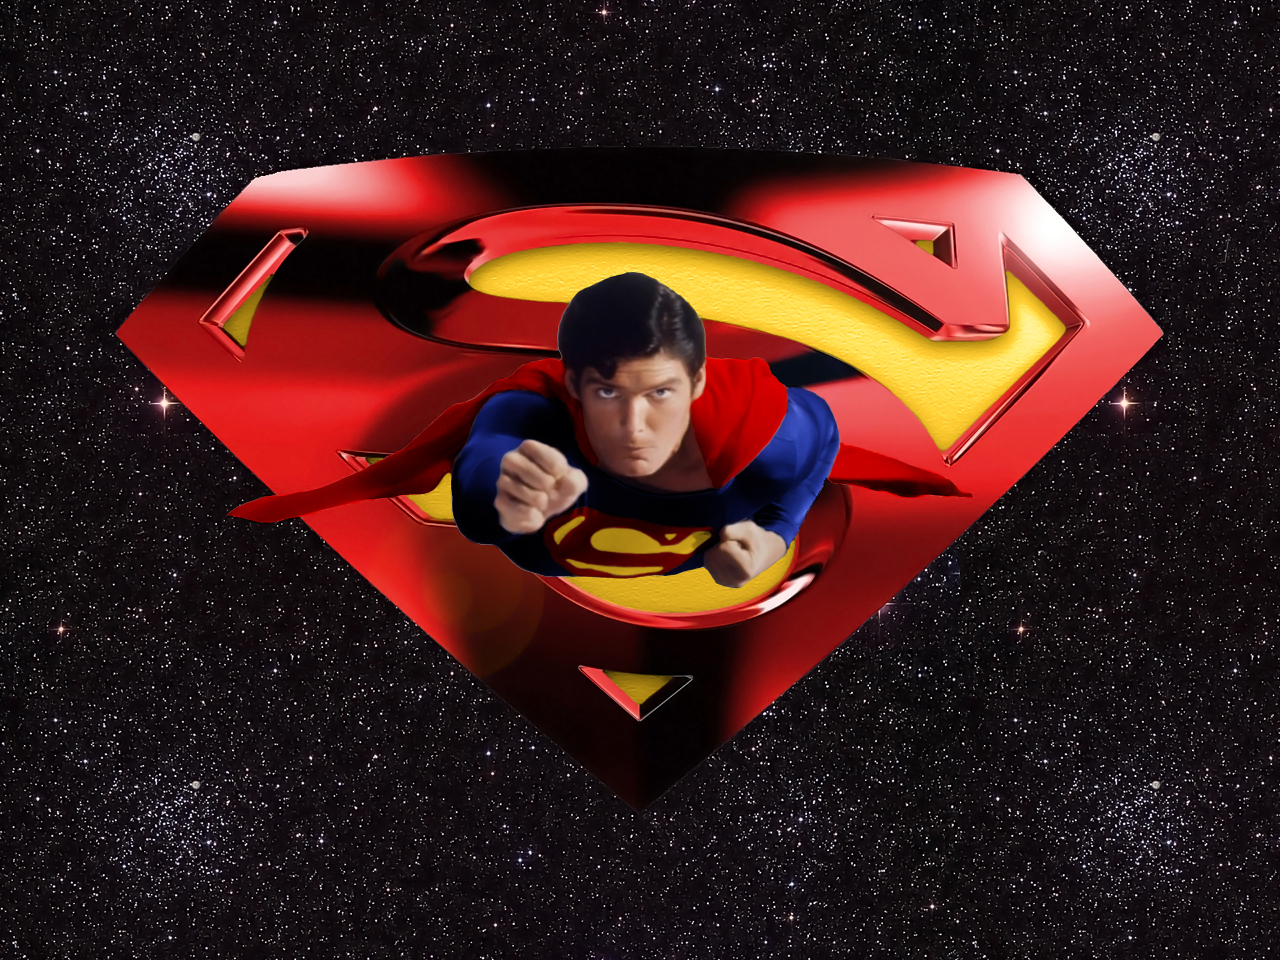 Christopher reeve superman wp by swfan on